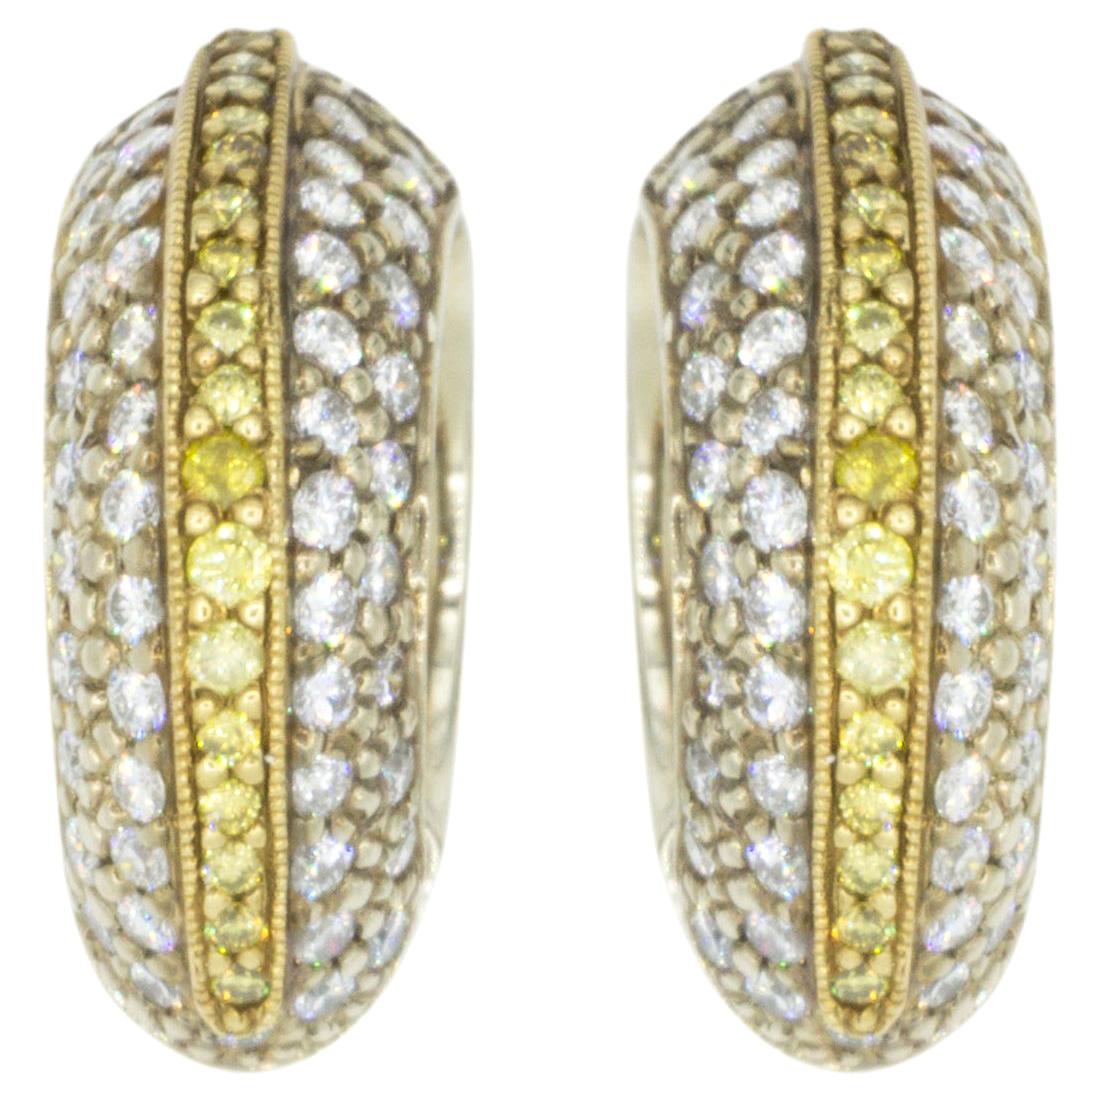 Two-Tone Gold 1.08 Carat Yellow and White Diamond Hoop Earrings by Rock N Gold